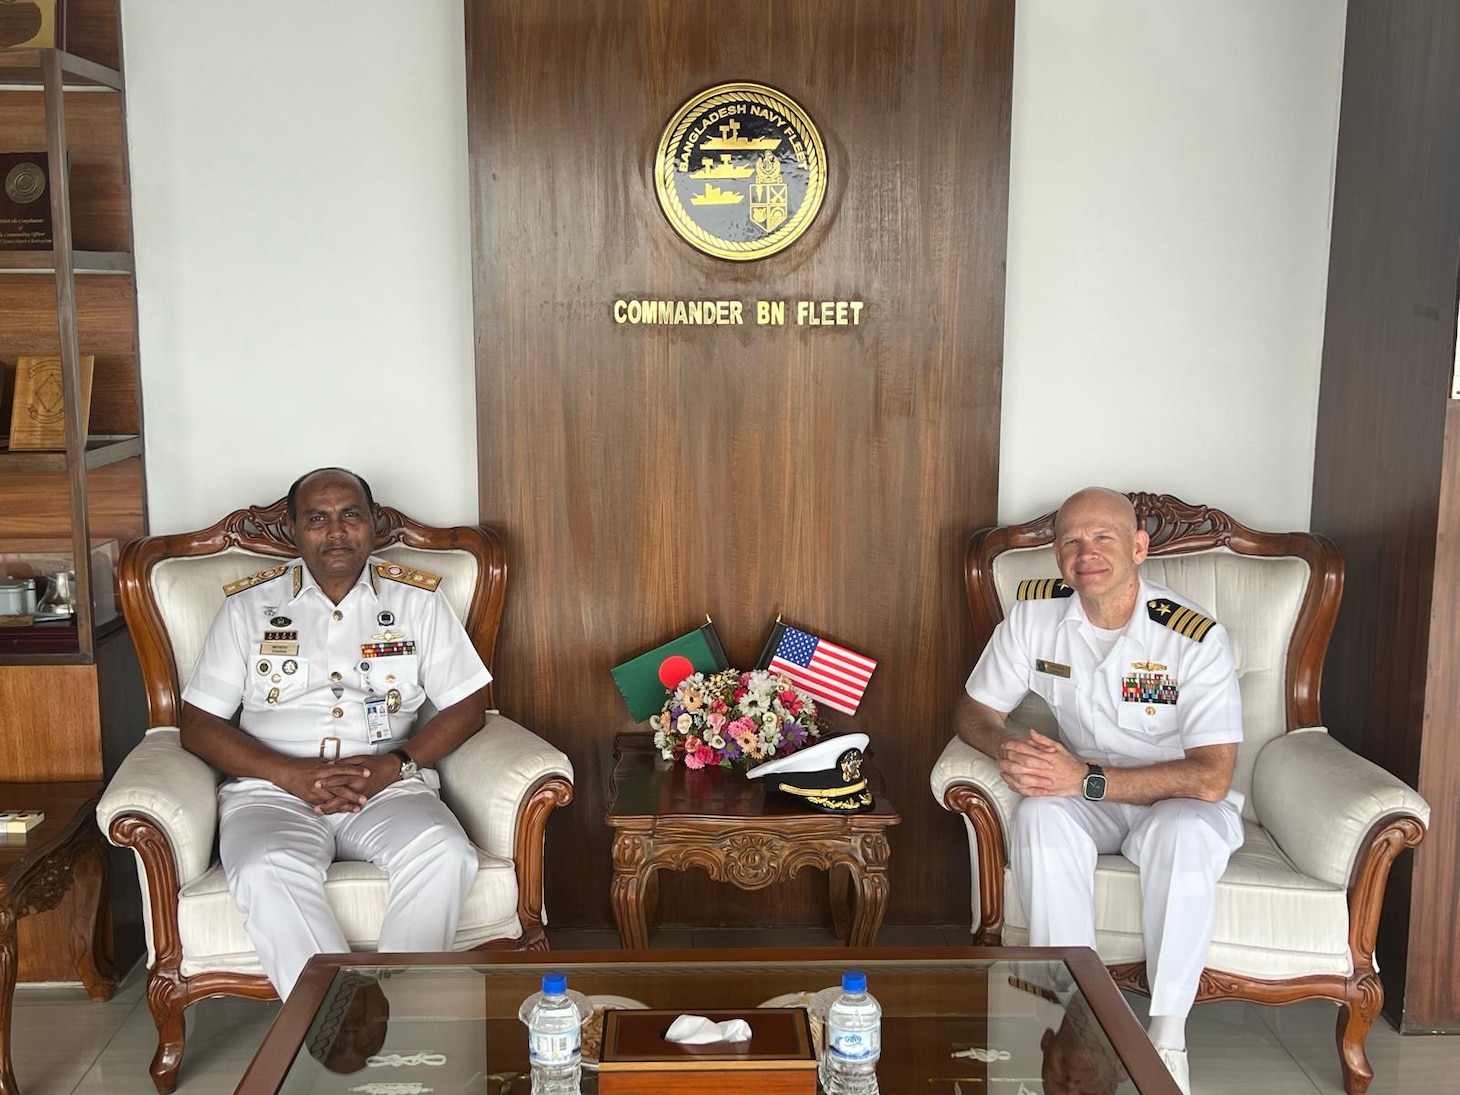 240422-N-NR876-1615 CHATTOGRAM, Bangladesh (April 22, 2024)- Capt. Matthew Scarlett, right, deputy commodore, Destroyer Squadron (DESRON) 7 poses for a photo with Bangladesh Navy Assistant Chief of Naval Staff (Operations), Rear Adm. Mohammad Anwar Hossain, left, during the opening ceremony for Cooperation Afloat Readiness and Training (CARAT) Exercise Bangladesh 2024. CARAT Bangladesh is a week-long exercise that seeks to enhance collaboration focused on shared maritime security challenges in the region. As the 30th iteration of the CARAT series, 2024 highlights the longstanding role of CARAT as a credible venue for regional Allies and partners to address shared maritime security priorities.